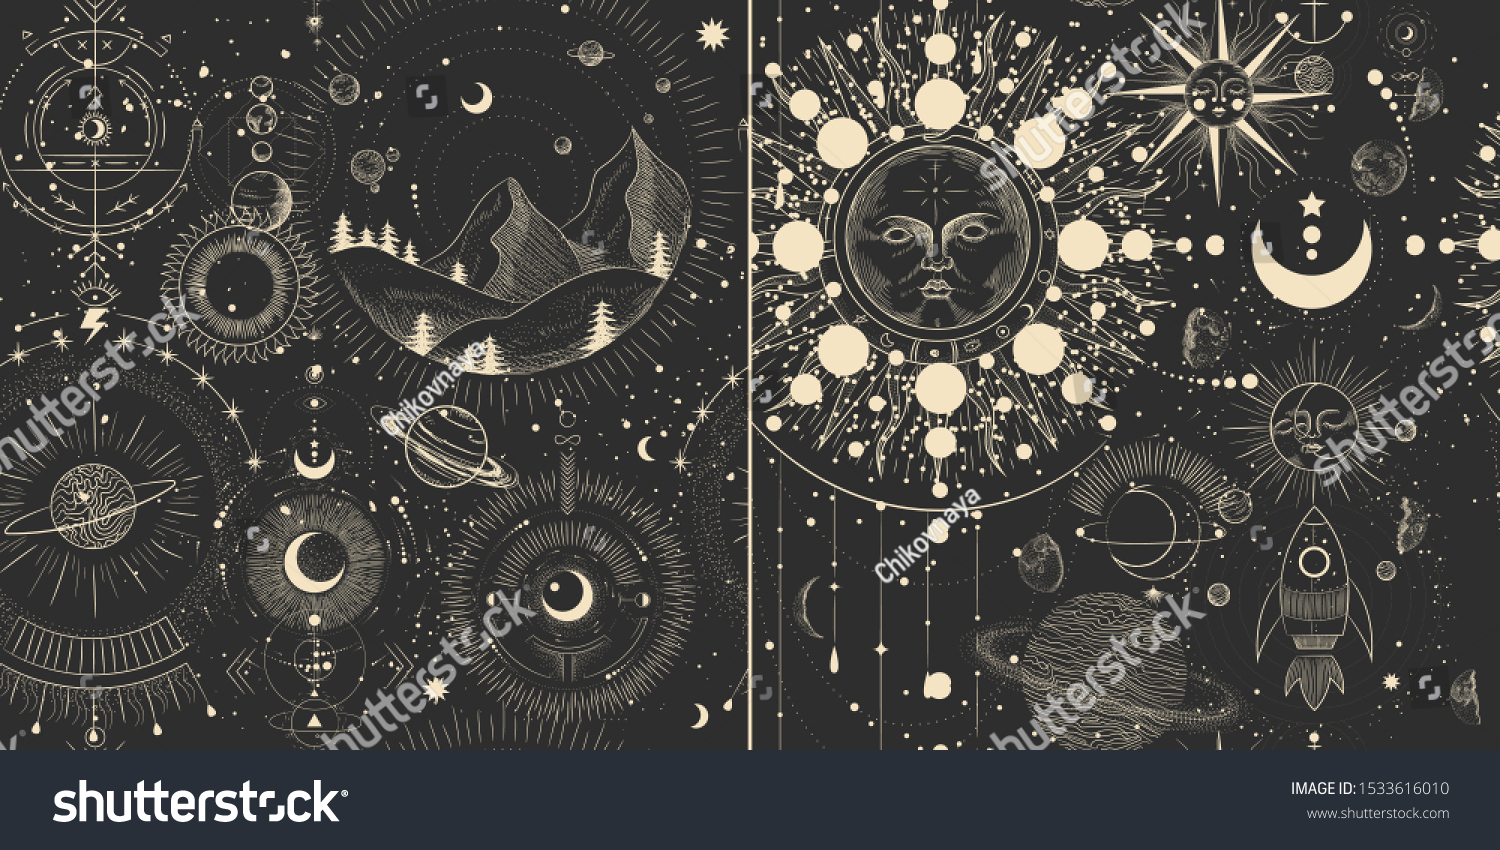 Vector illustration set of moon phases. Different stages of moonlight activity in vintage engraving style. Zodiac Signs #1533616010